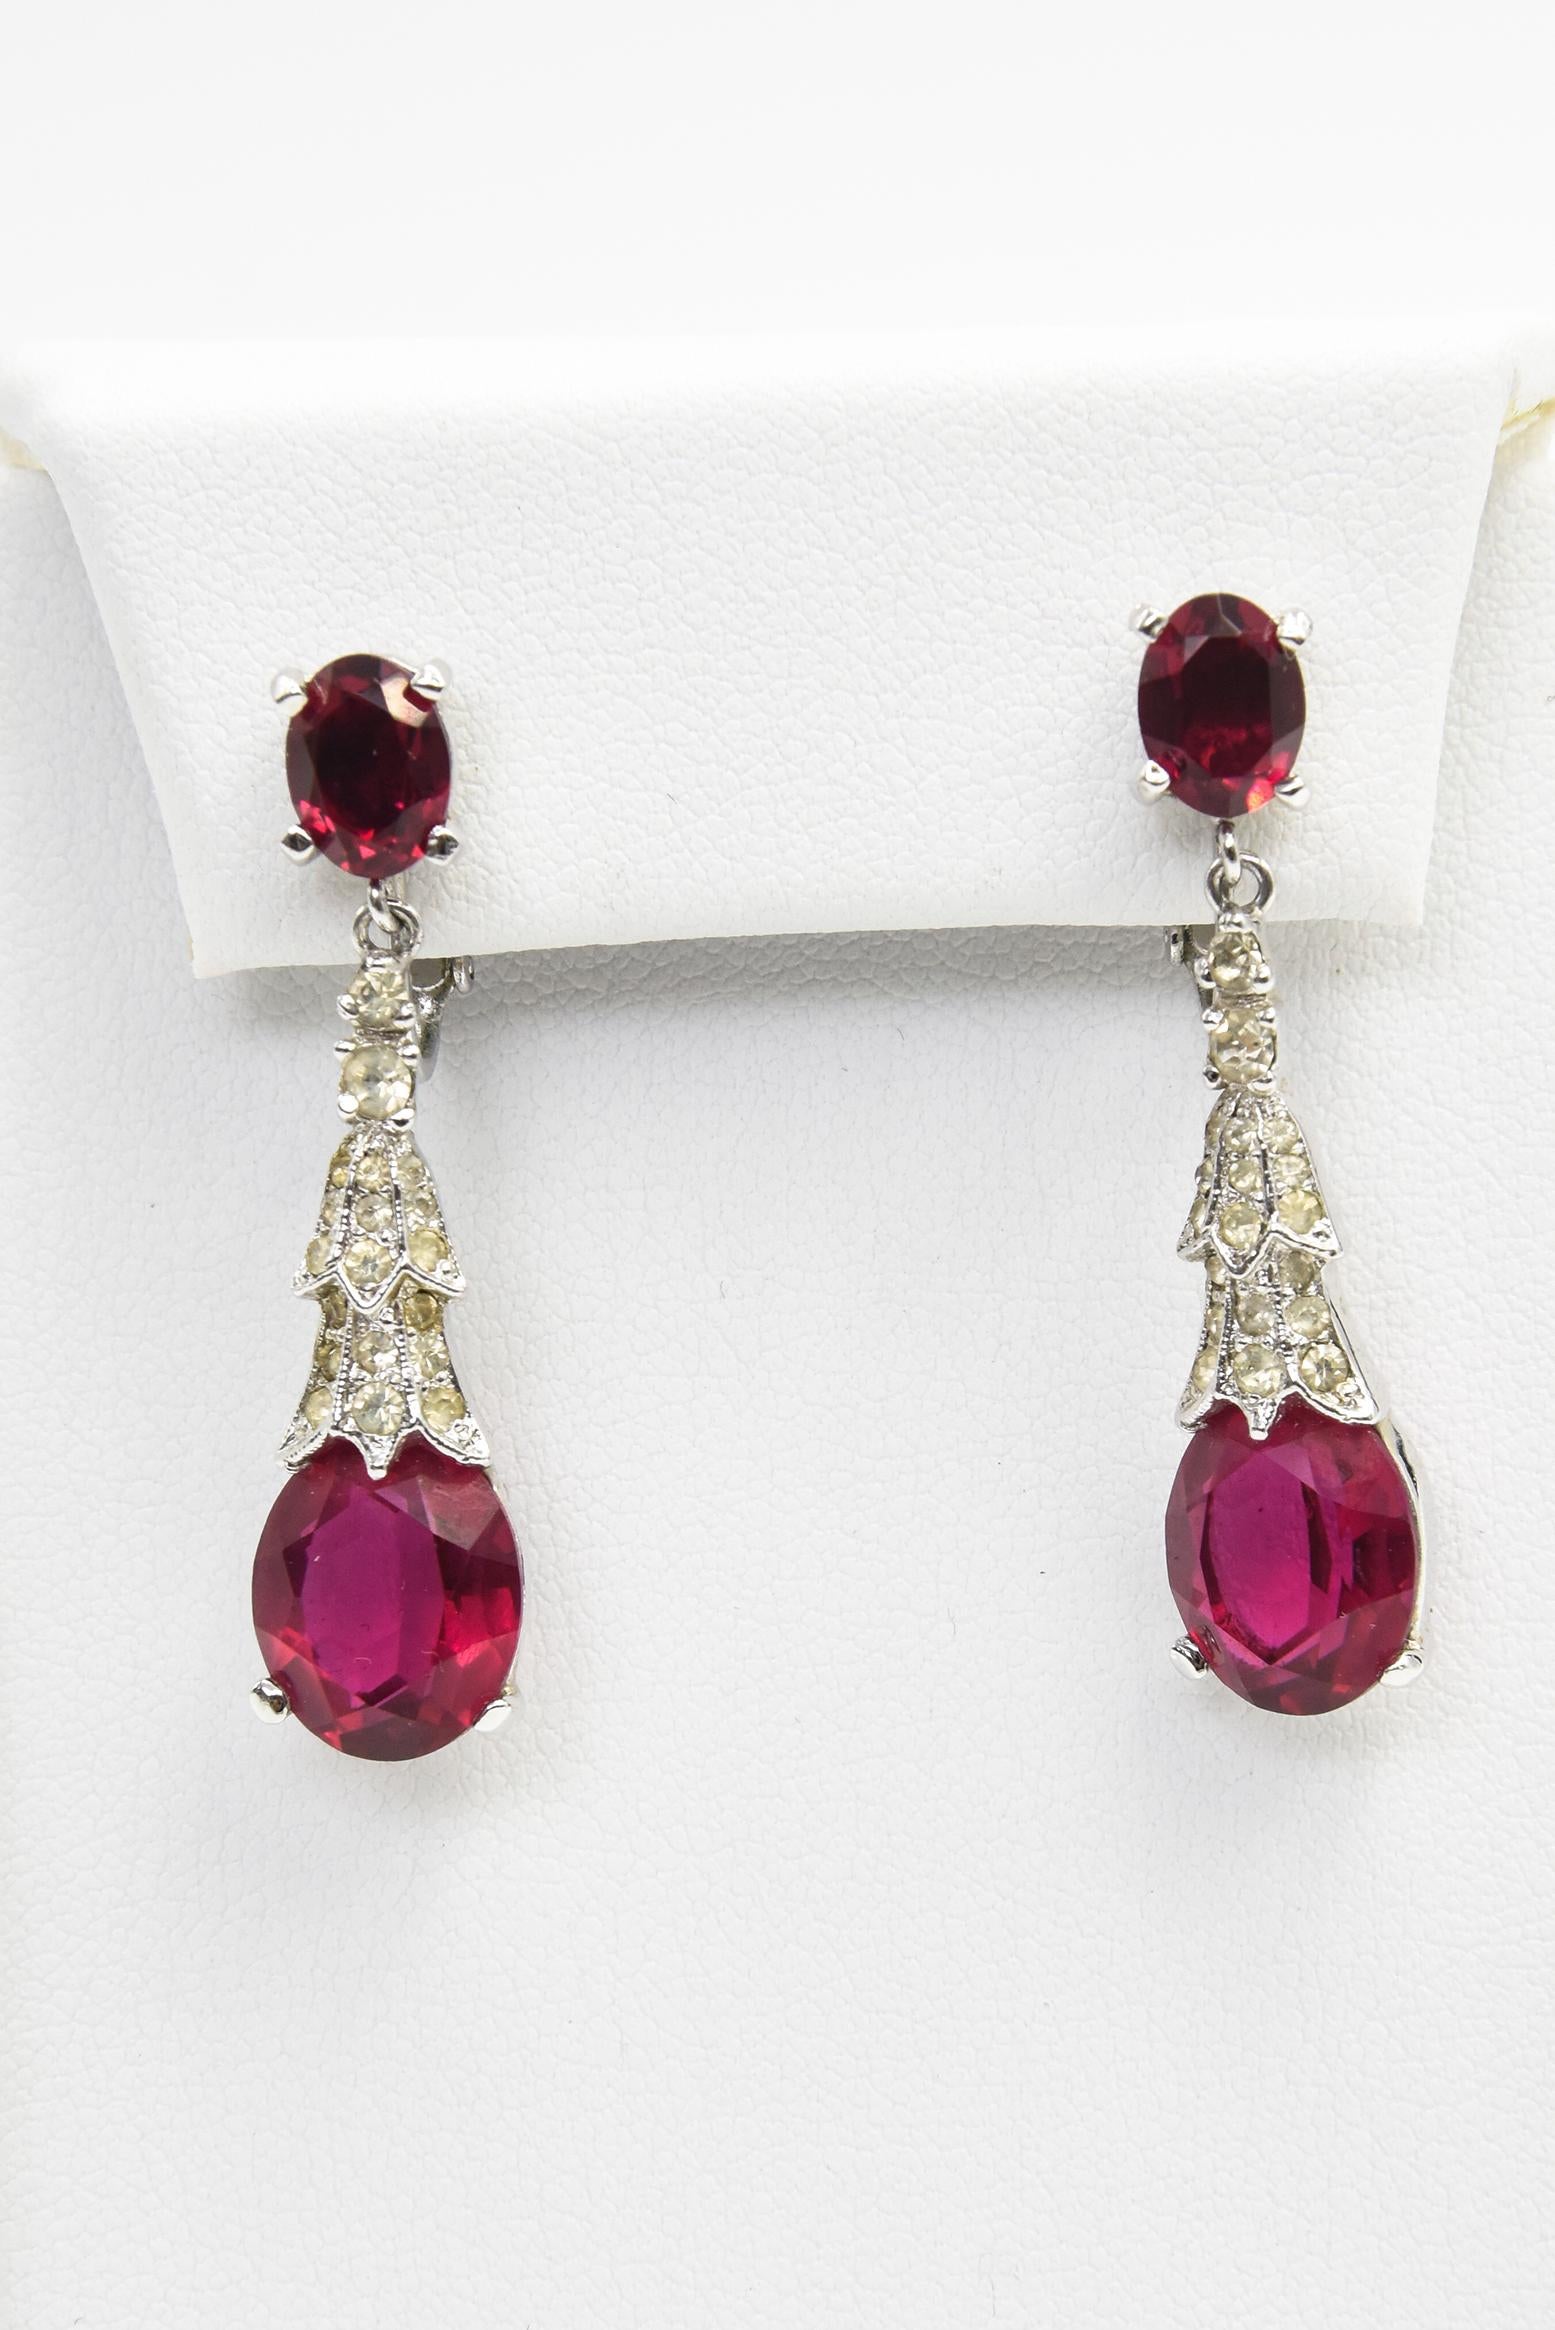 Panetta is truly one of the best of the great pretenders. His costume pieces are finely made to give you the look of real at the price of costume.  In these mid 20th century clip on earrings he uses red and clear crystals to create a fake ruby drop